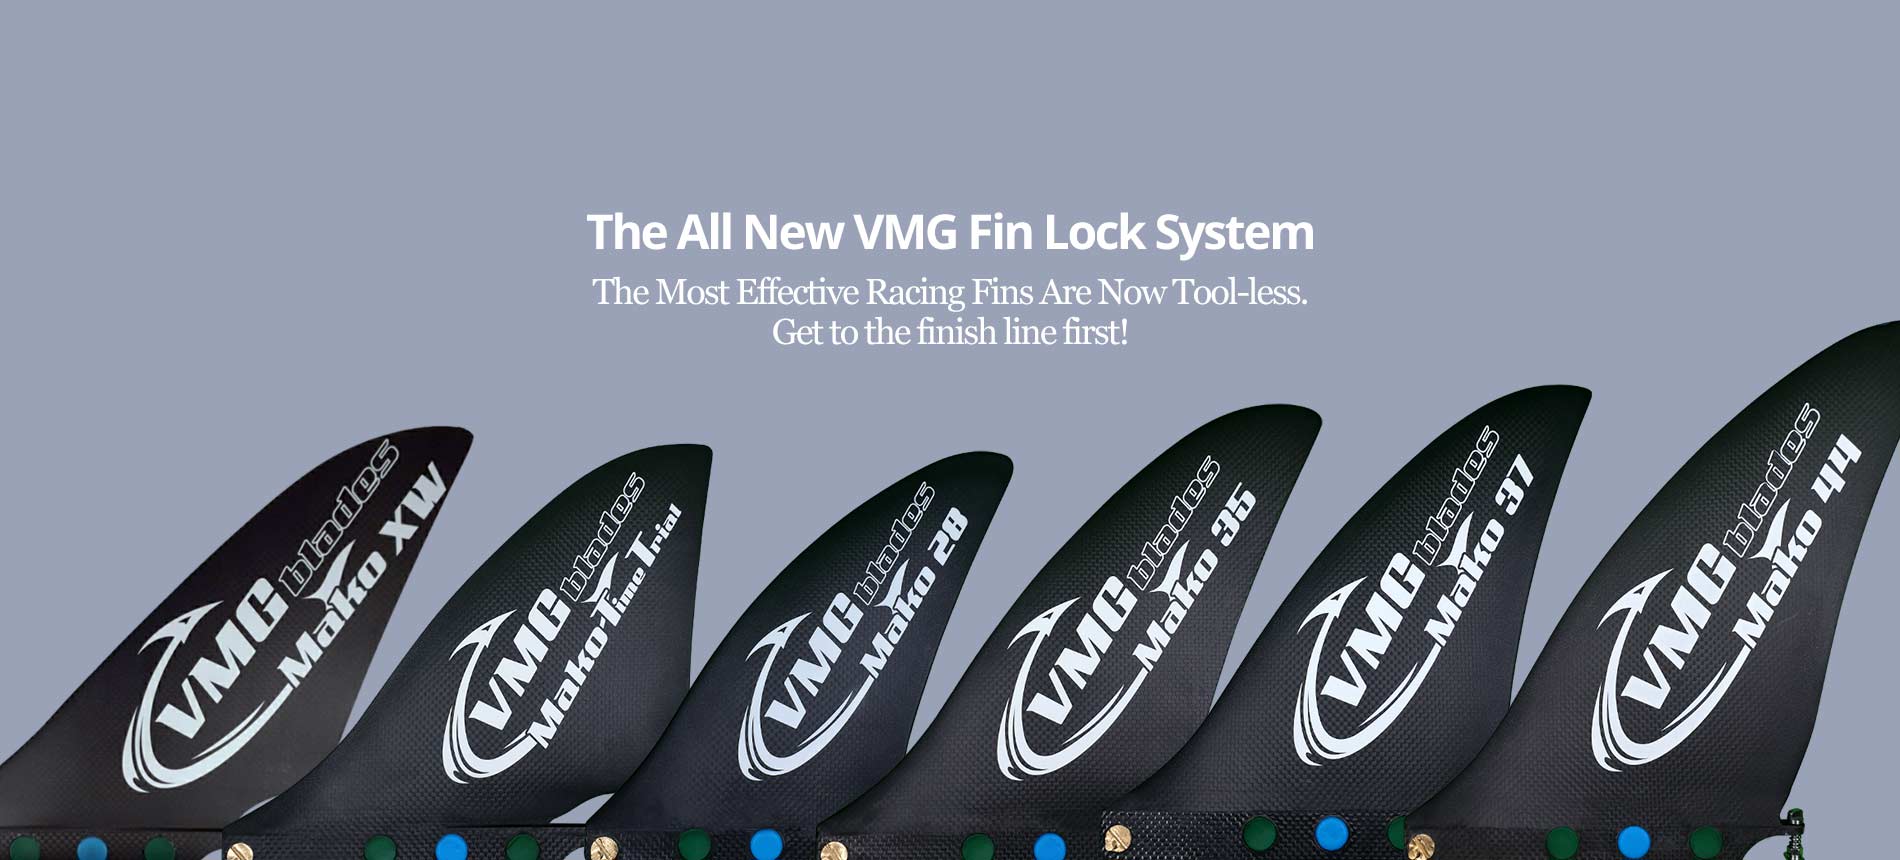 SUP Race Fin - Get to the finish line first with VMG blades